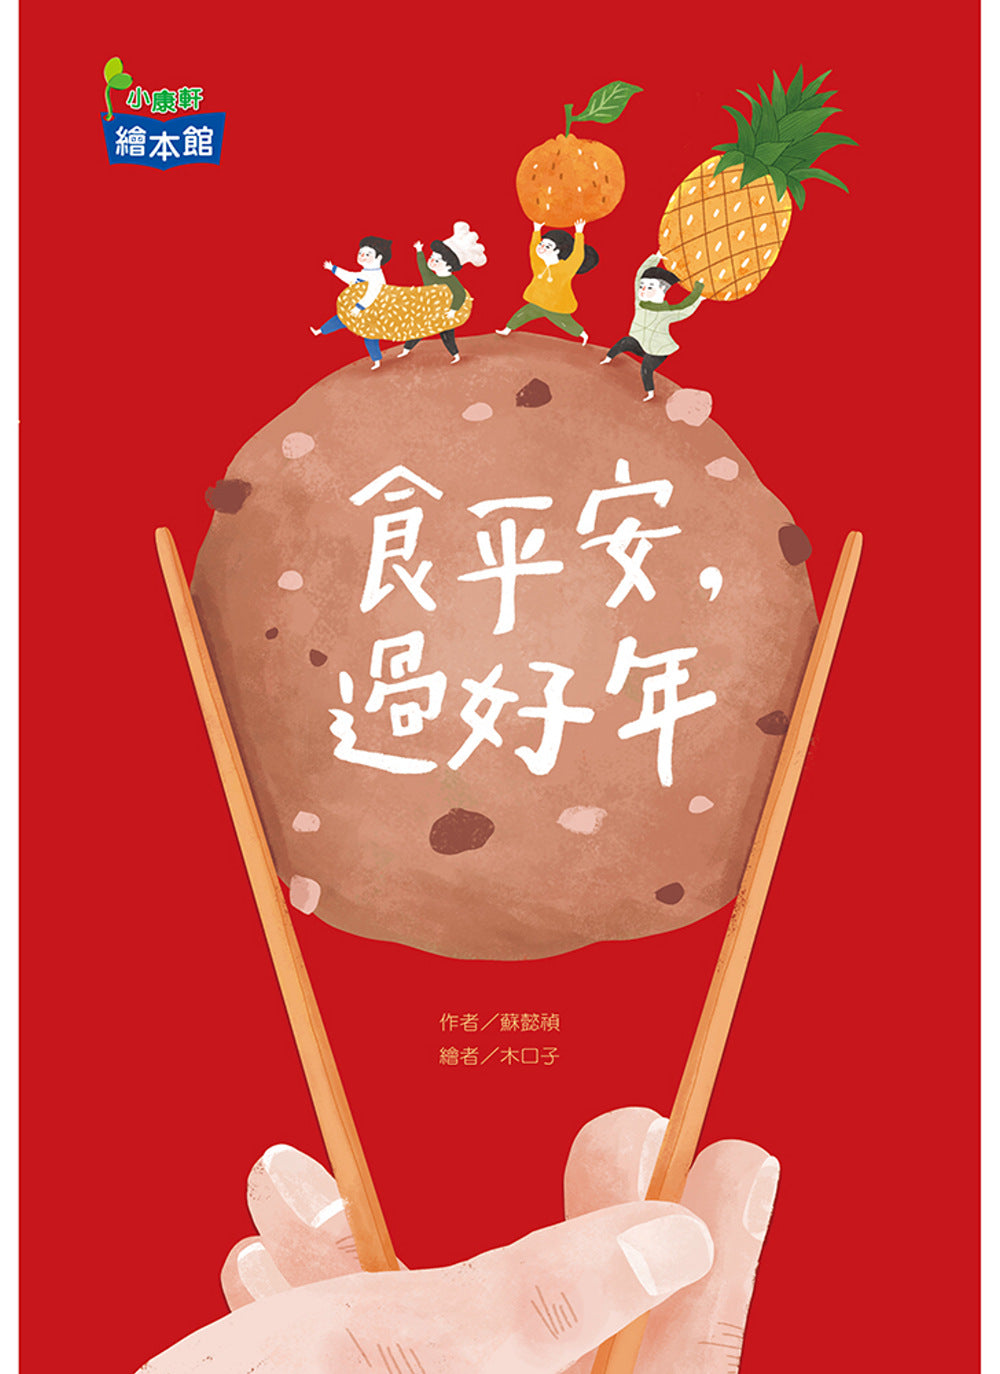 Eat Well, and Have a Happy New Year • 食平安，過好年